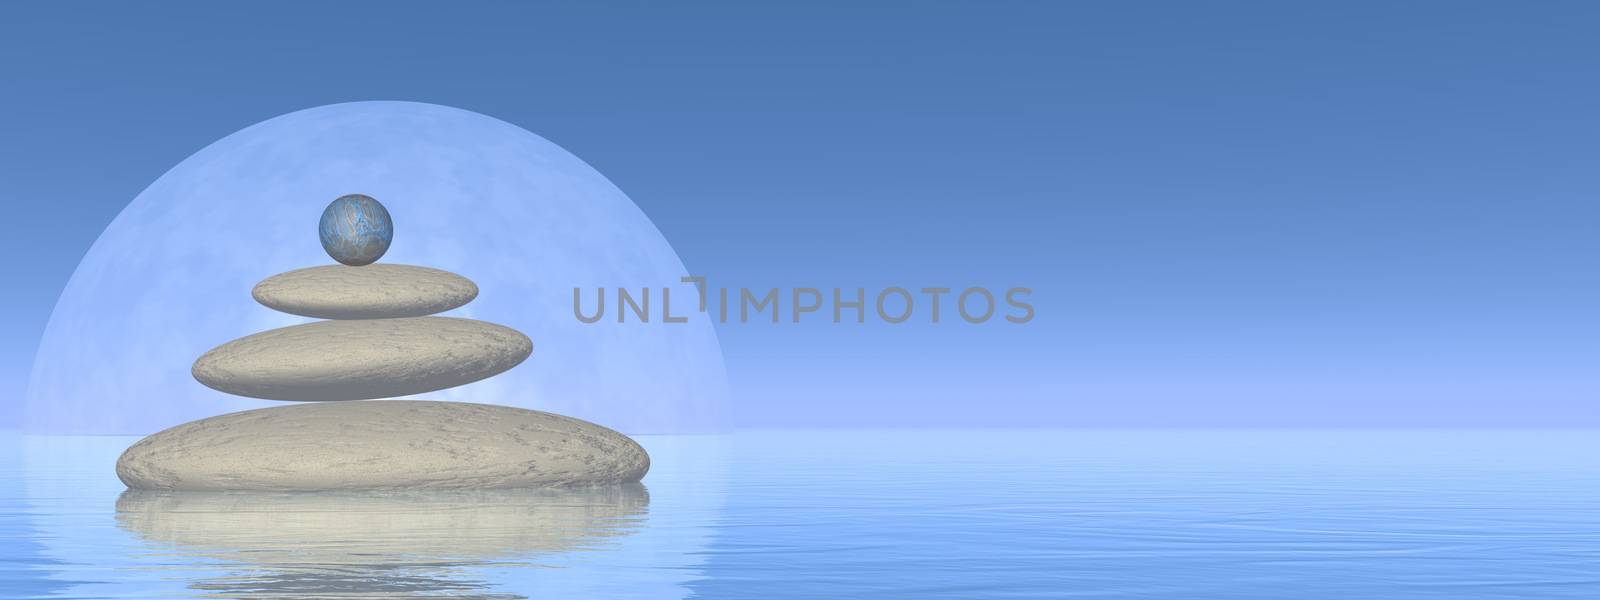 White stones upon water in front of big full moon by clear night - 3D render